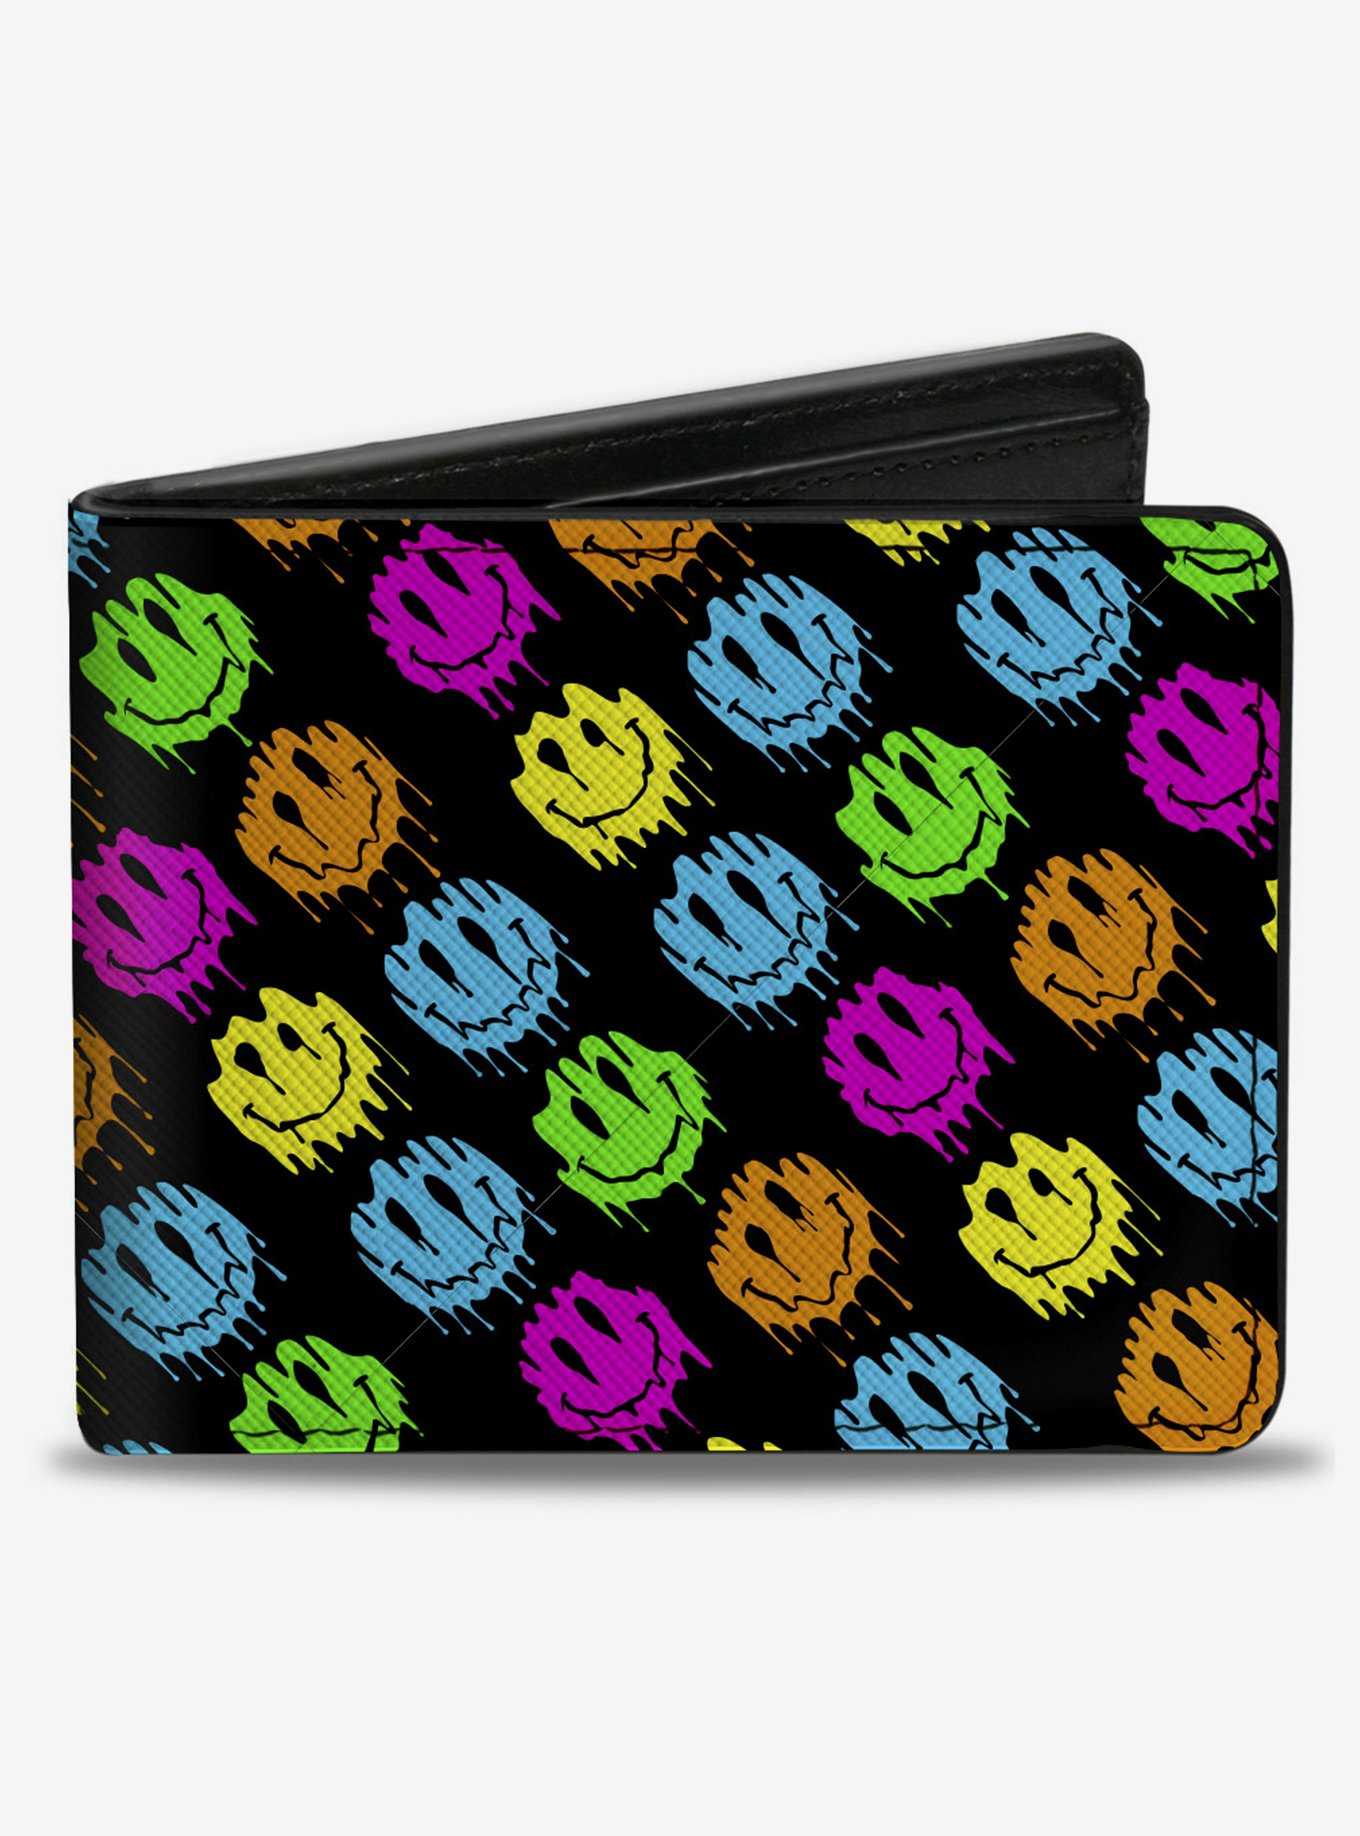 Smiley Faces Melted Mini Repeat Angle Bifold Wallet, , hi-res